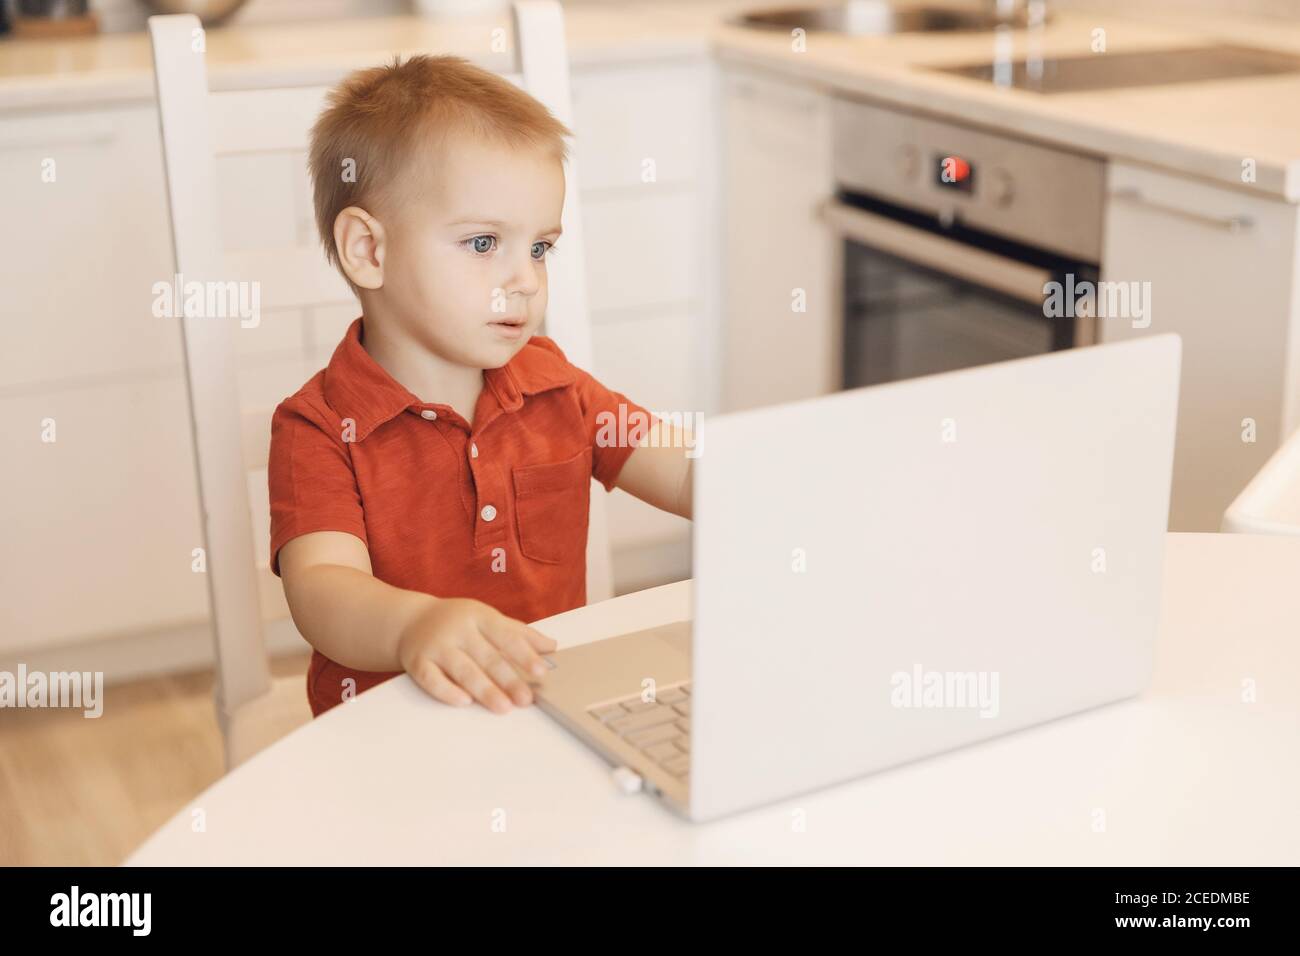 Online education of children quarantine, boy learns through video chat. Concept viewing cartoons or videoblog Stock Photo